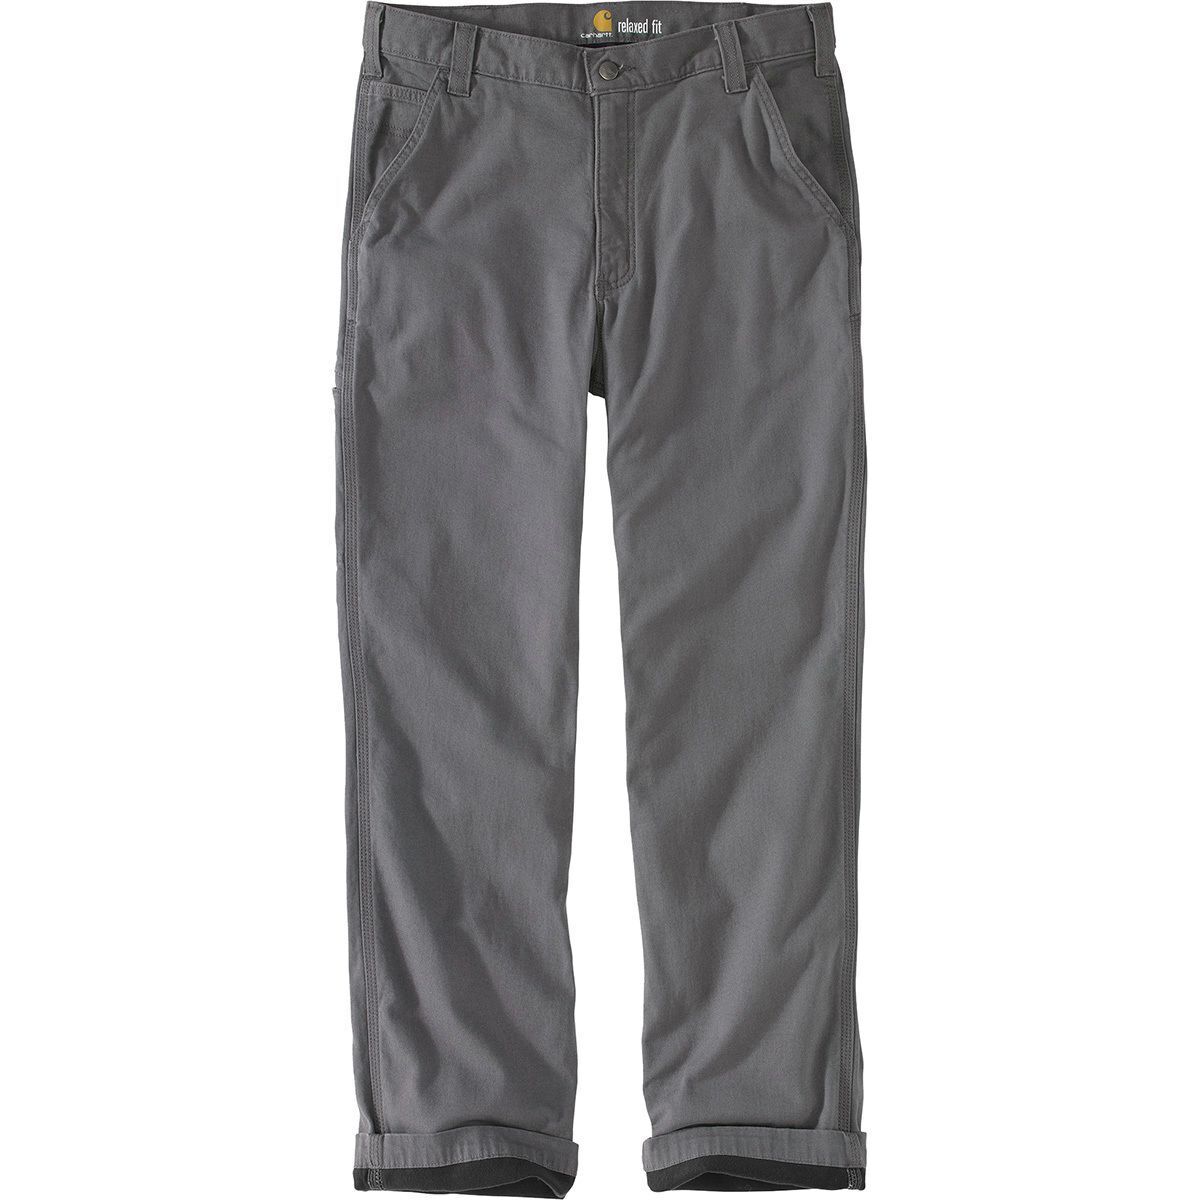 Carhartt Rugged Flex Rigby Dungaree Knit Lined Pant - Men's - Clothing